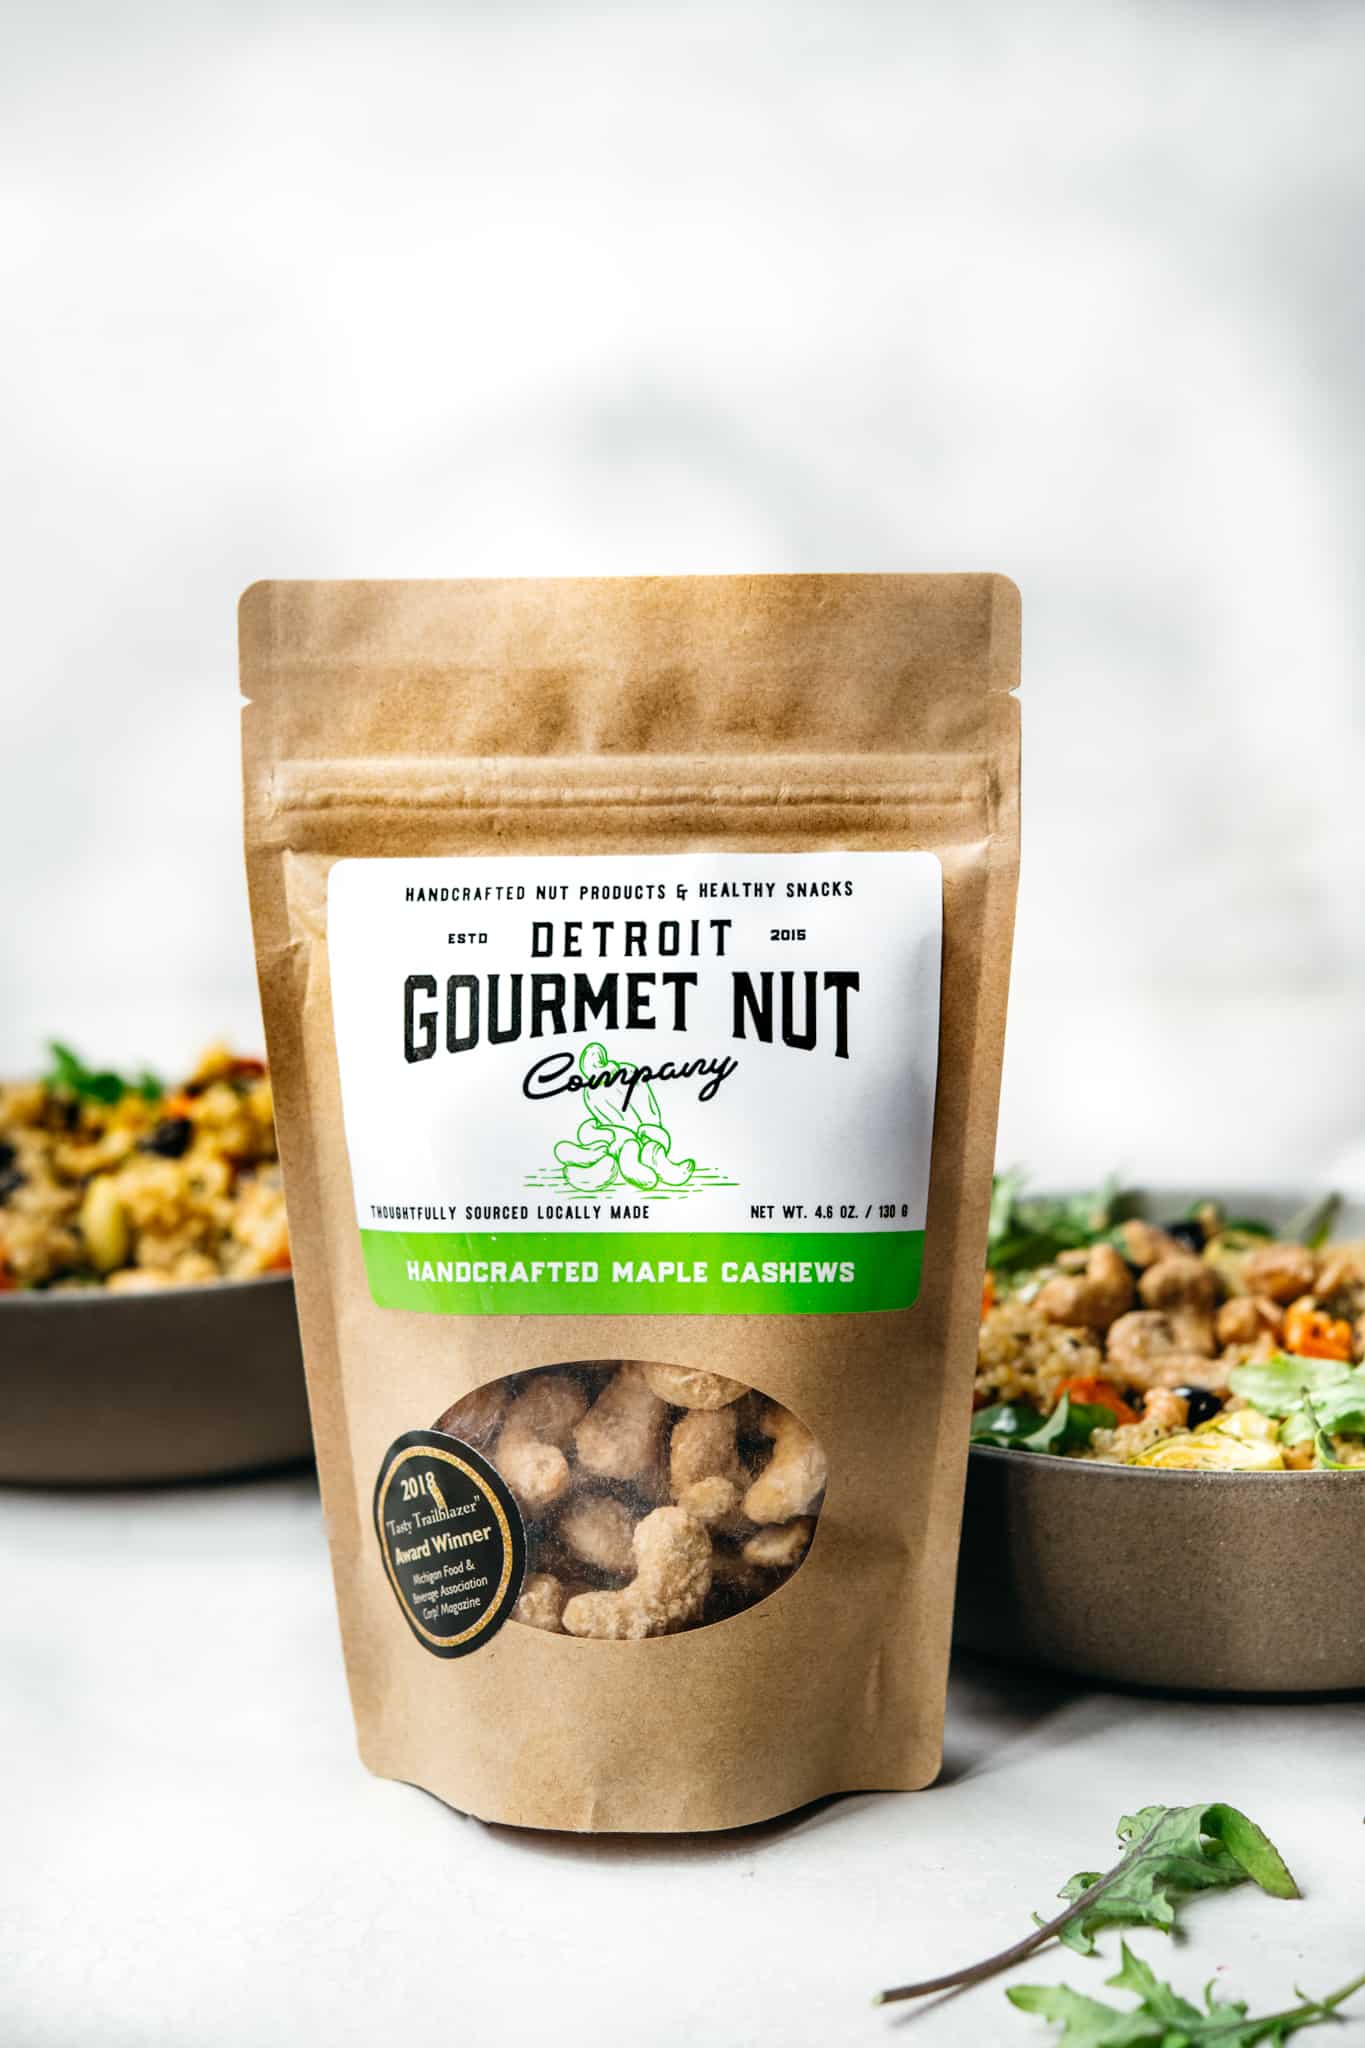 Detroit Gourmet Nut Company handcrafted maple cashews 